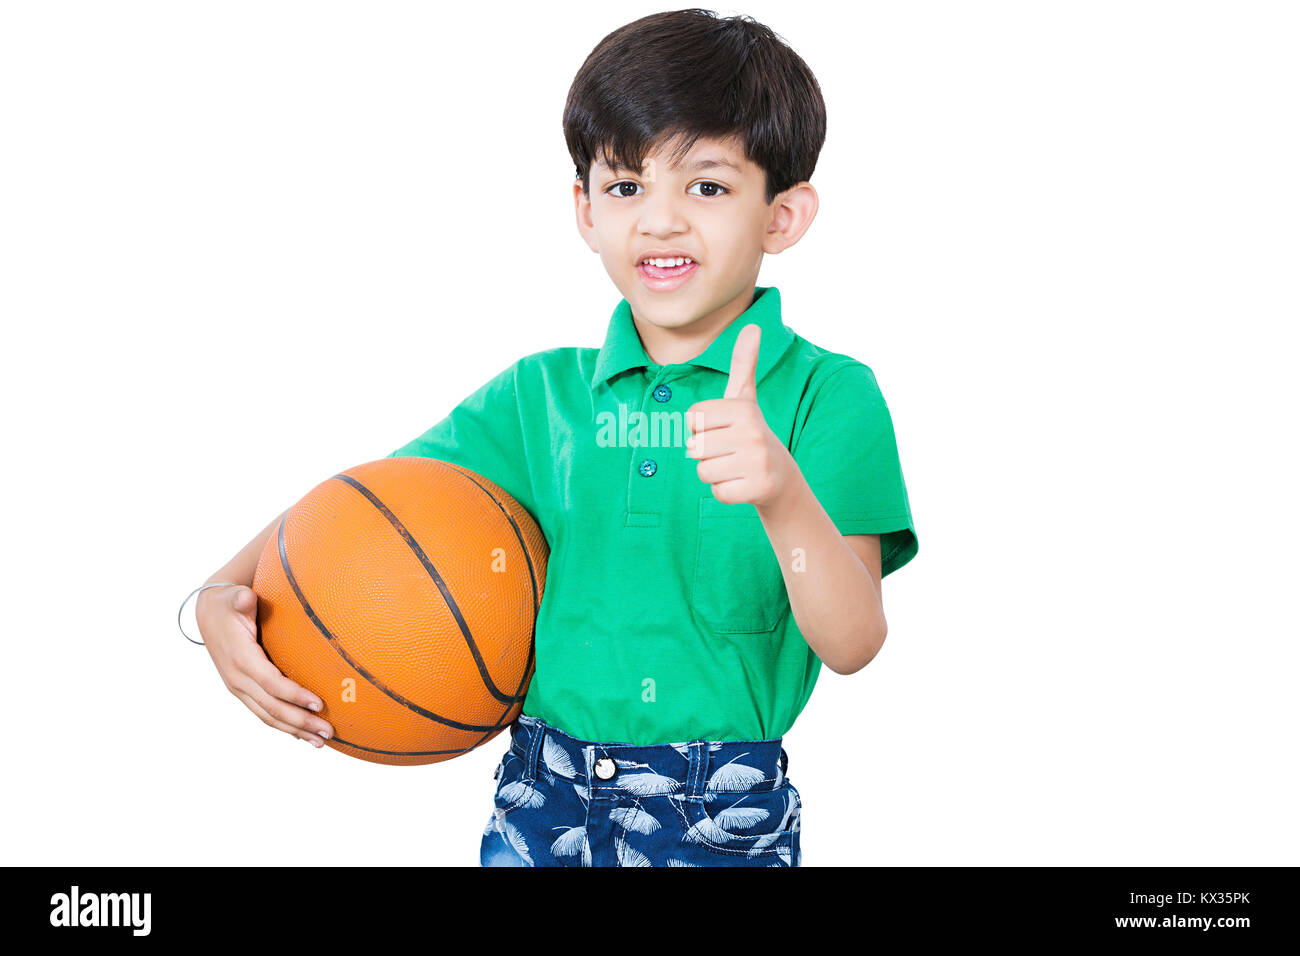 1 Kid Boy Holding Ball Basketball Playing game Showing Thumbs-up Stock Photo